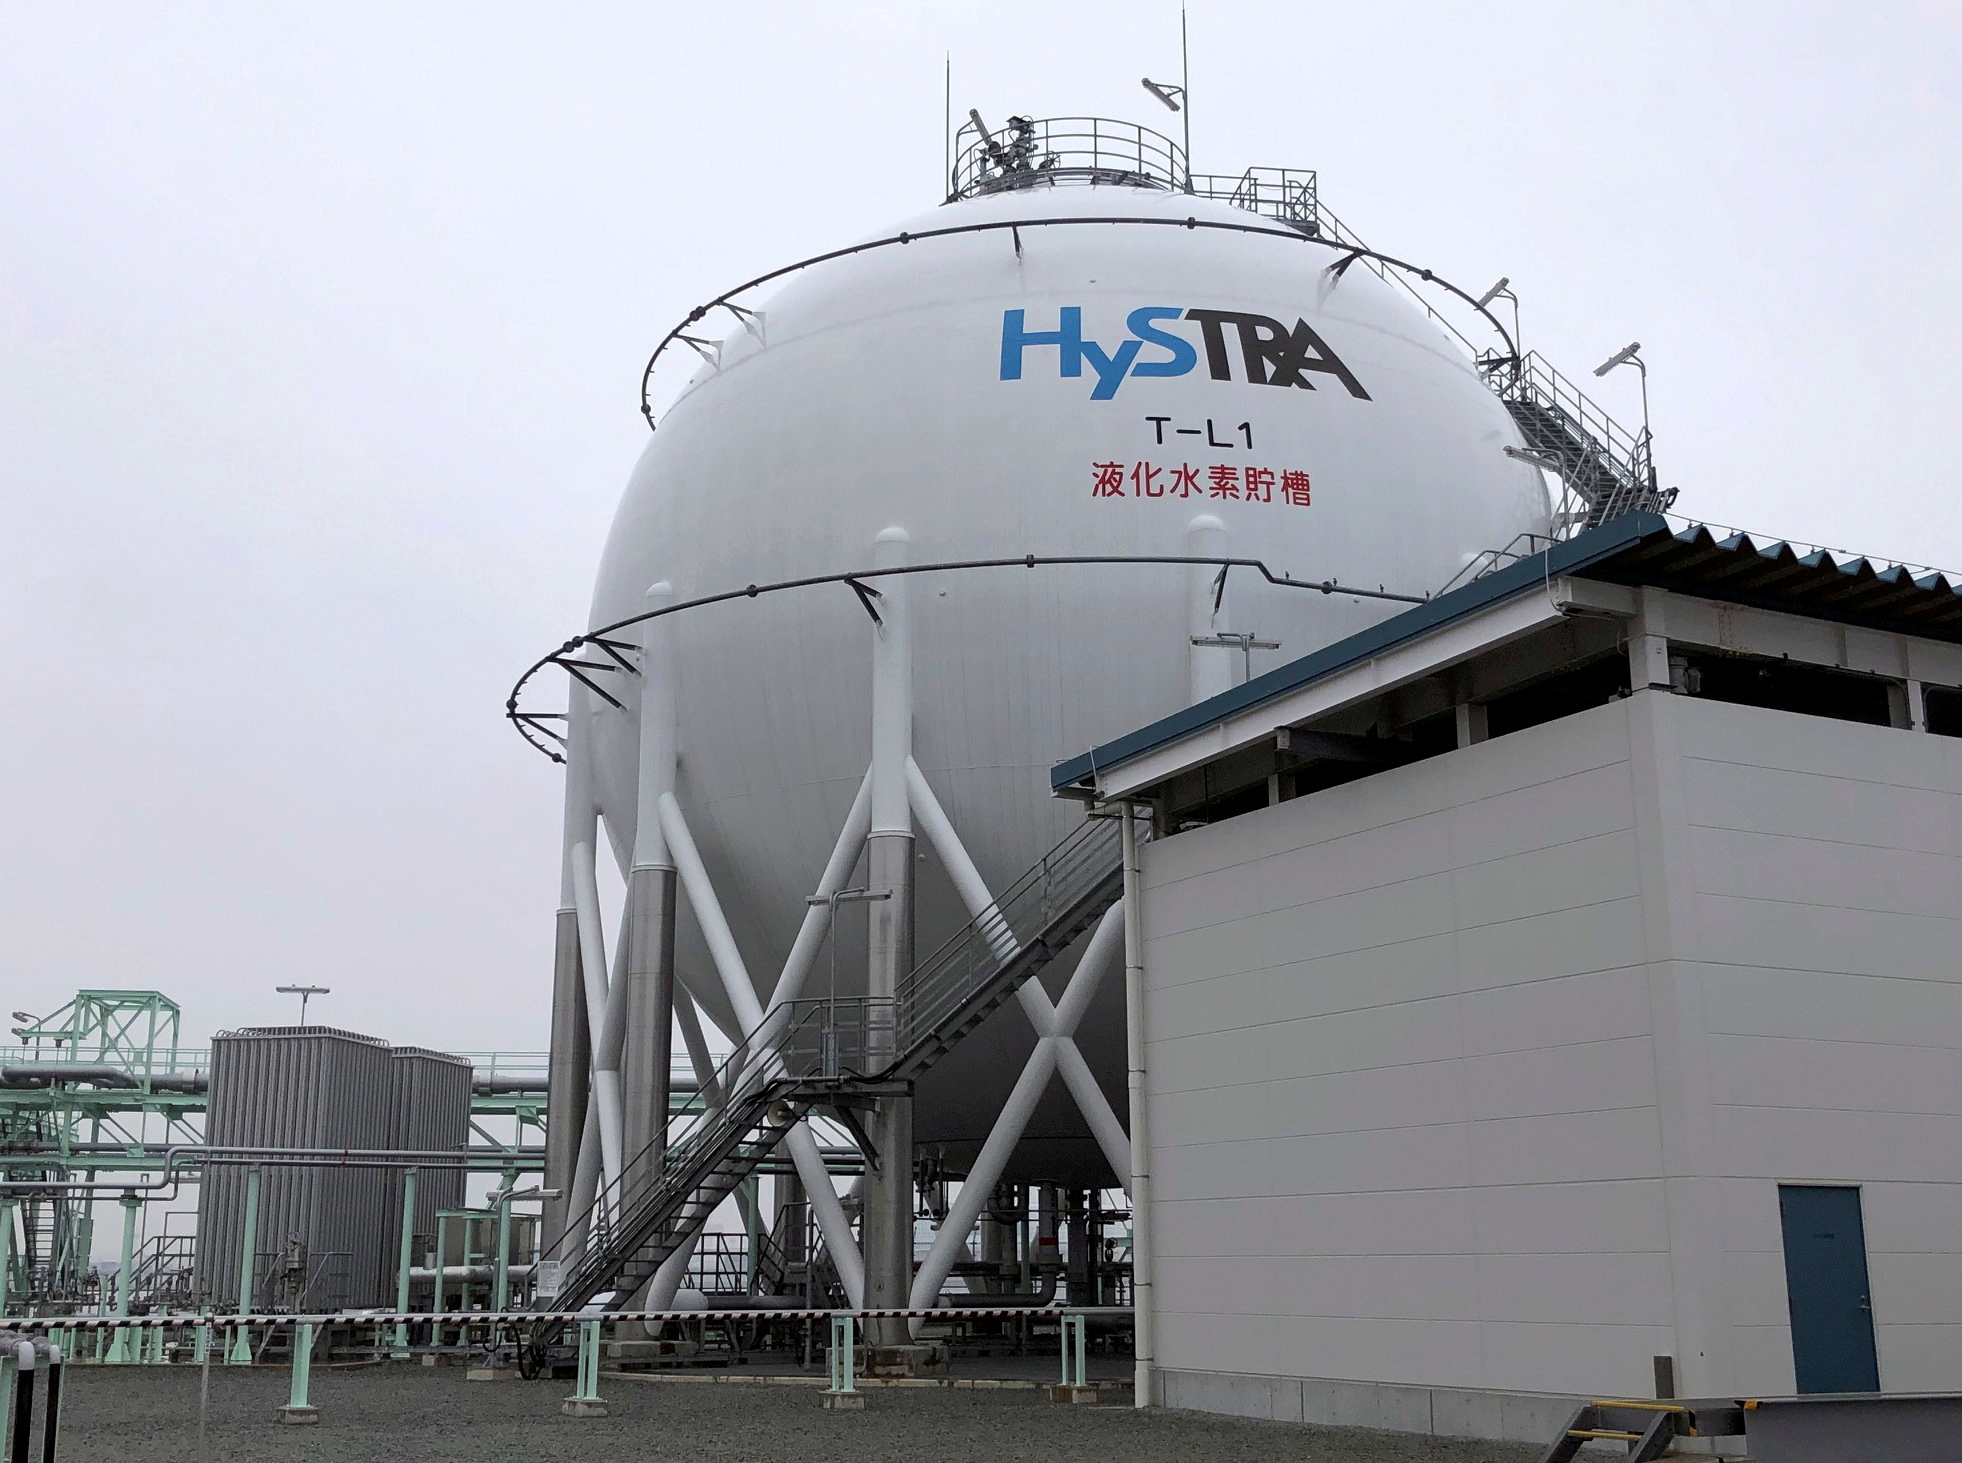 The logo of the HySTRA is seen on a liquefied hydrogen storage tank in Kobe, Japan